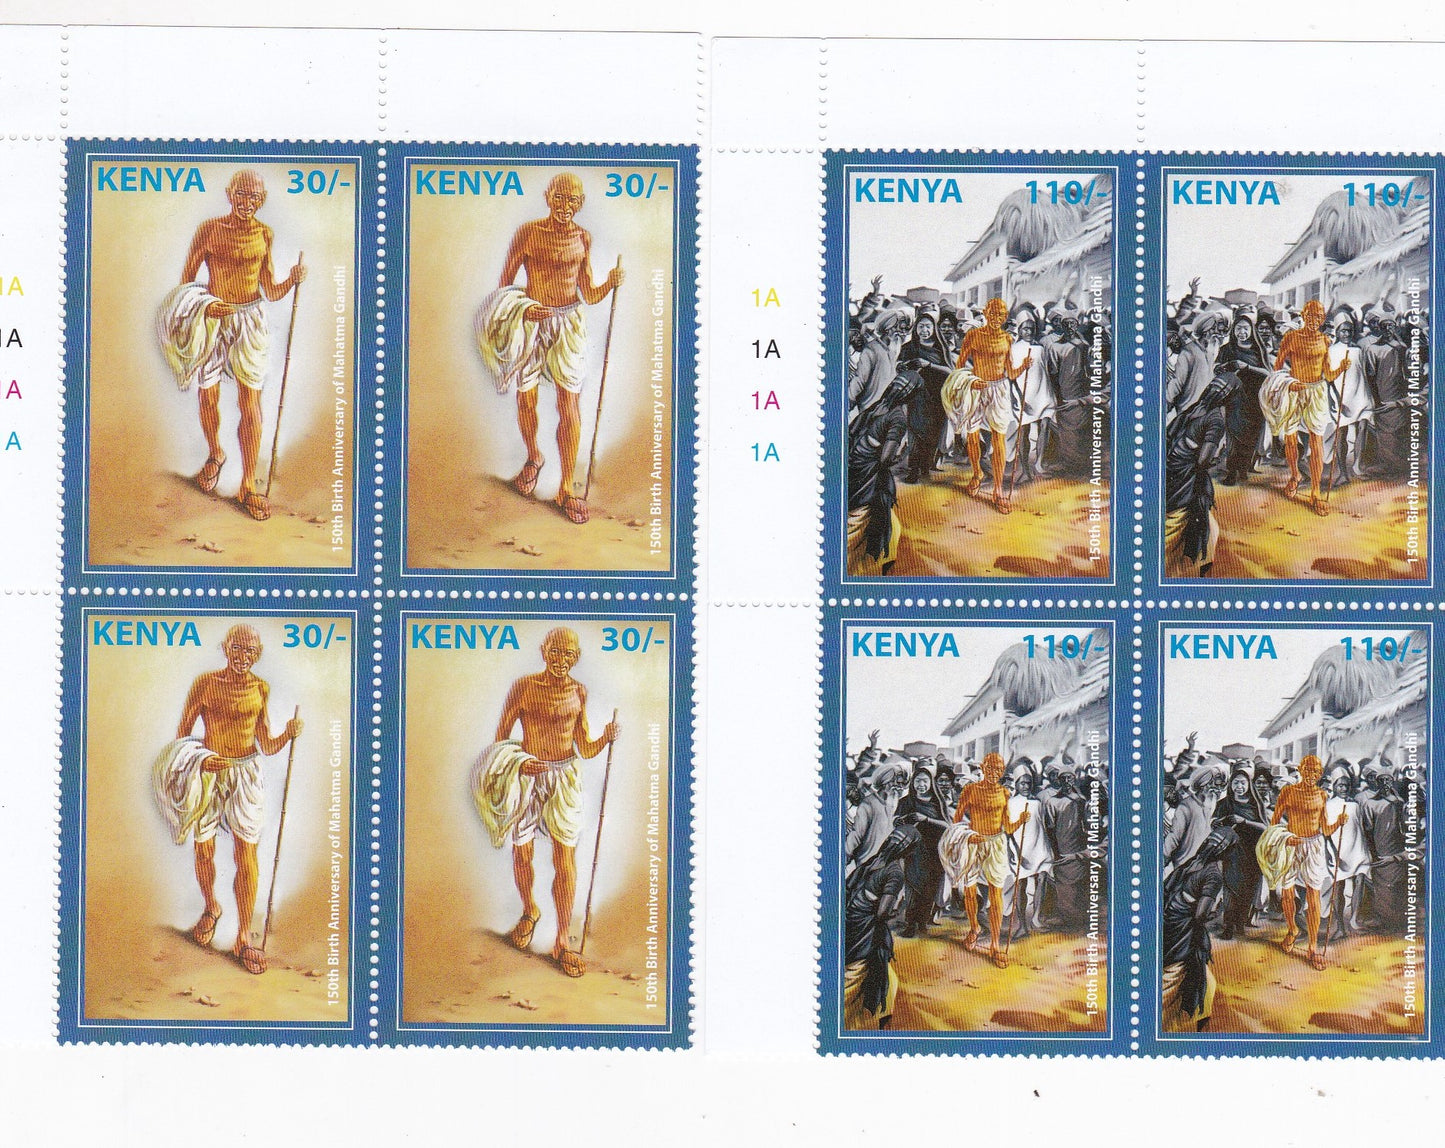 Kenya World's last issue on Gandhi 150 years celebrations-block of 4 with Color Code